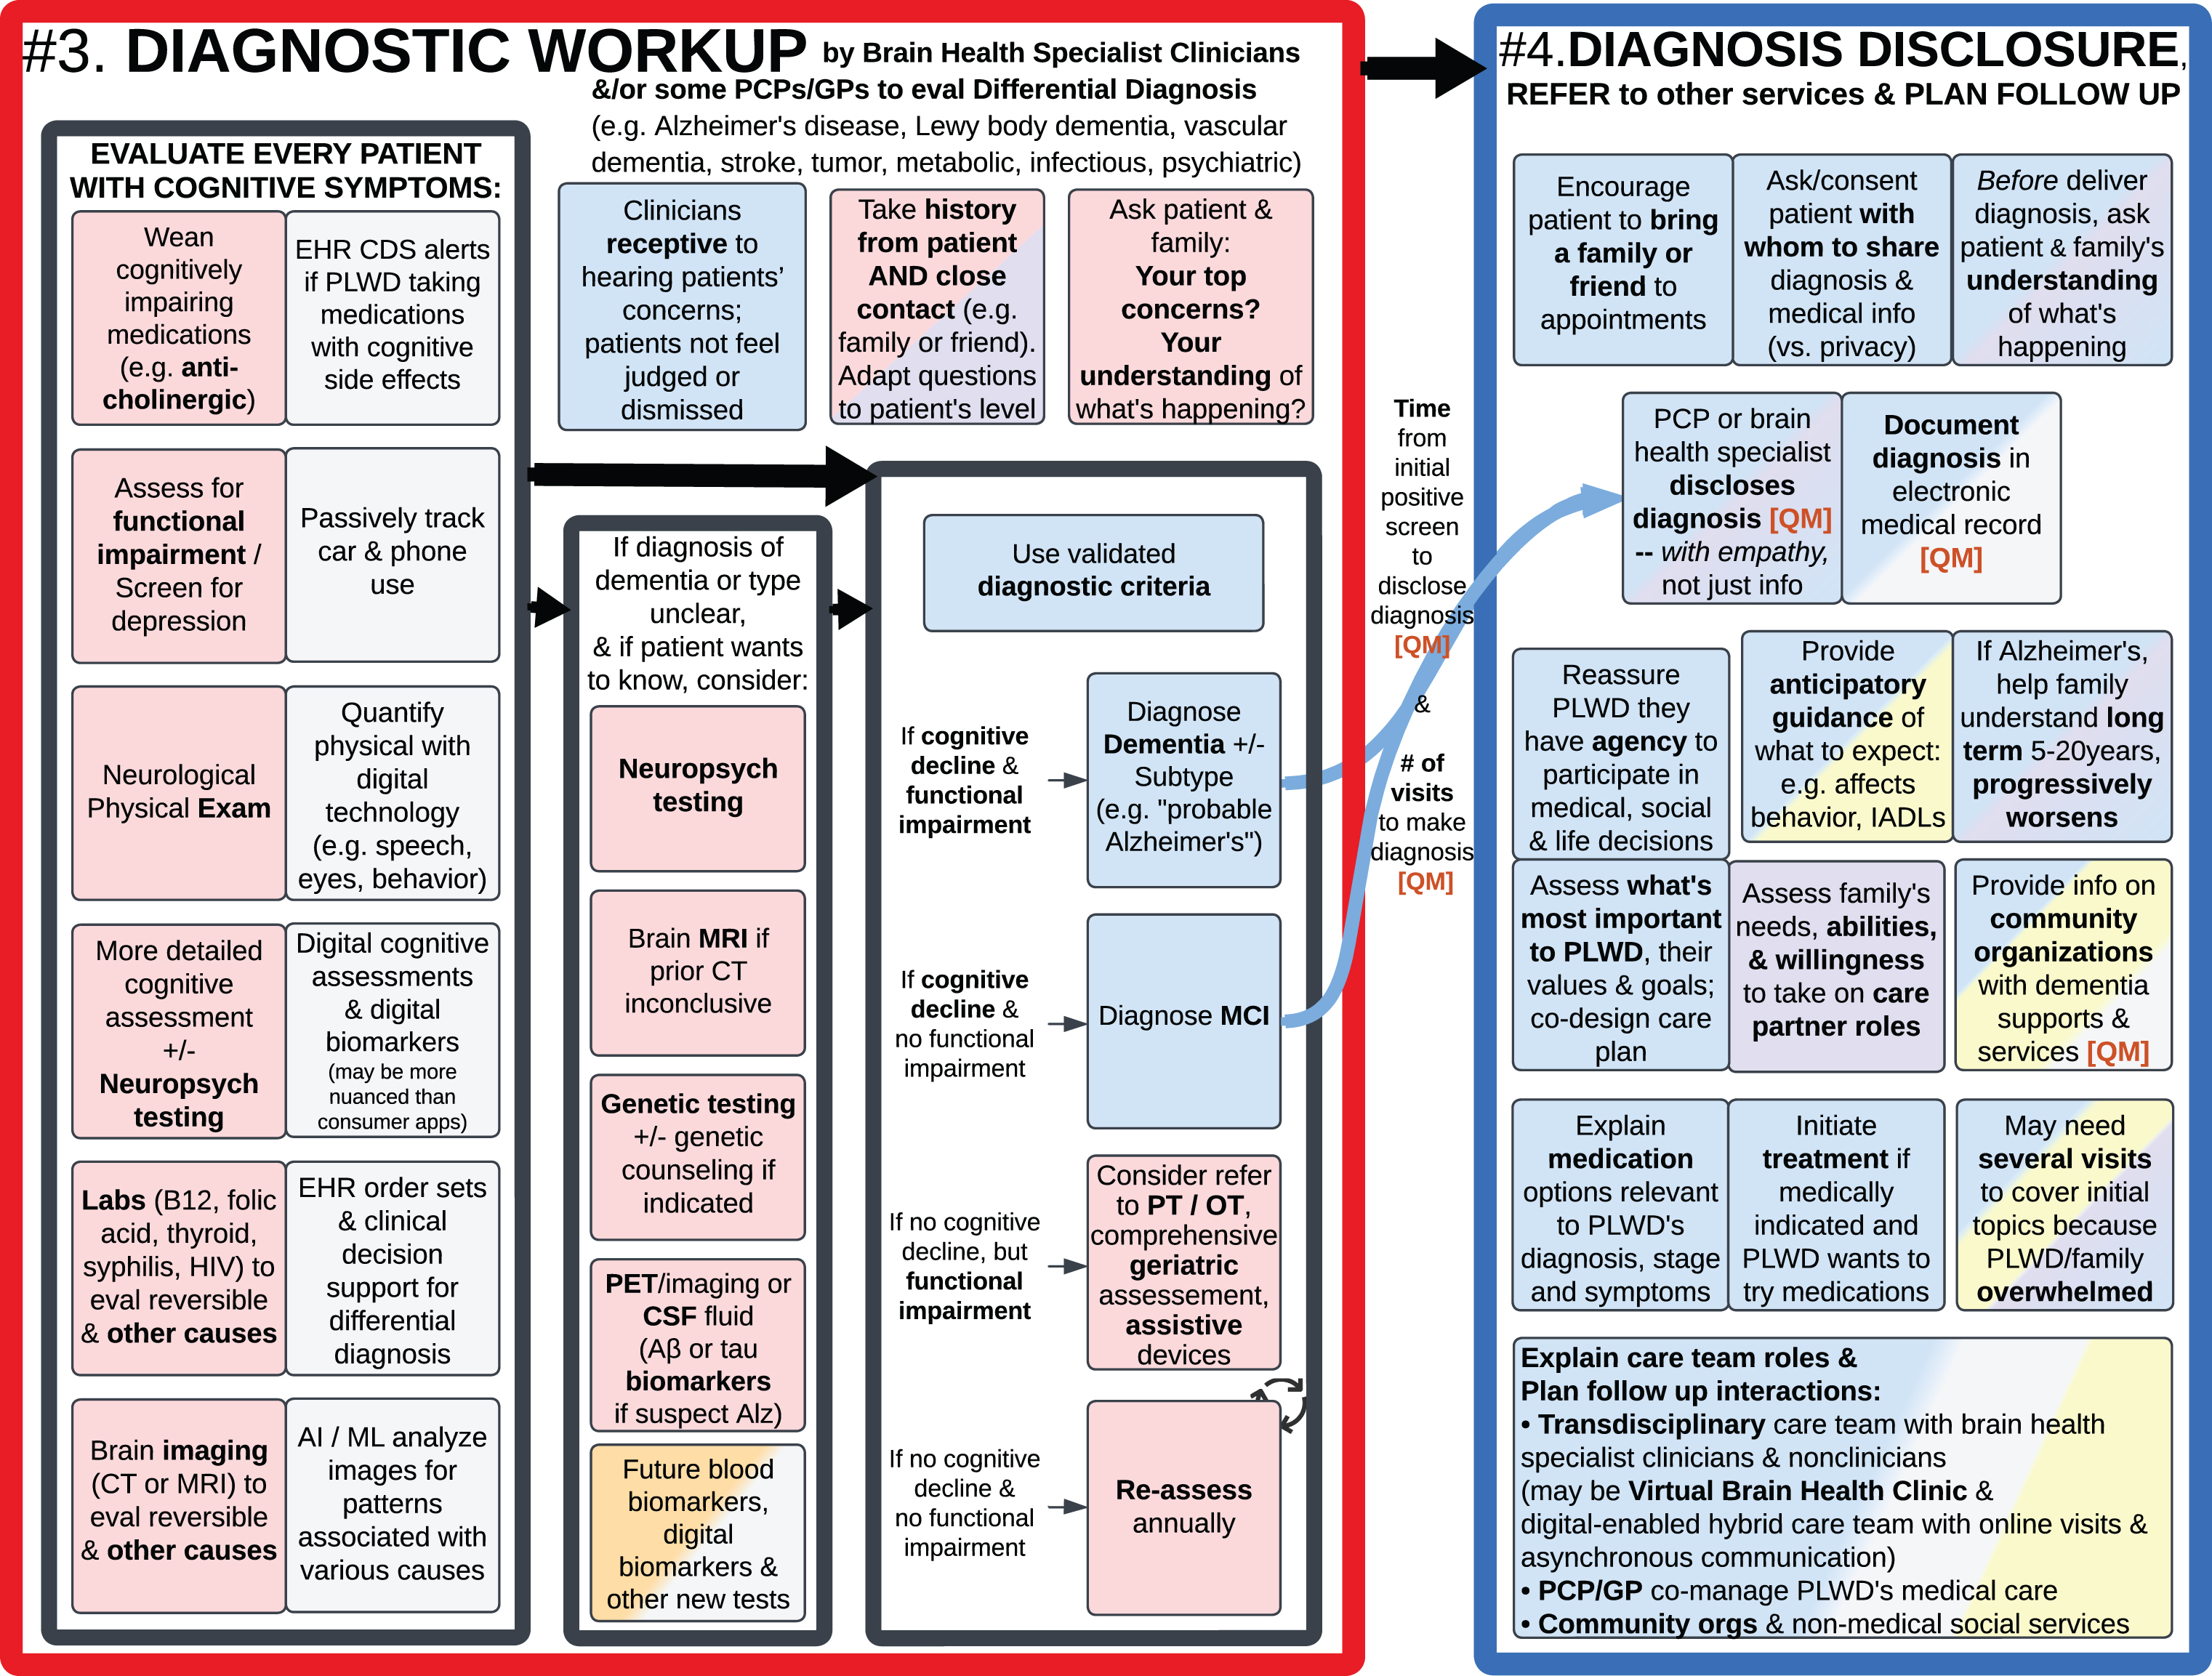 #3. Diagnostic Workup (left); #4. Disclose Diagnosis, Refer to Other Services, and Plan Follow Up (right).